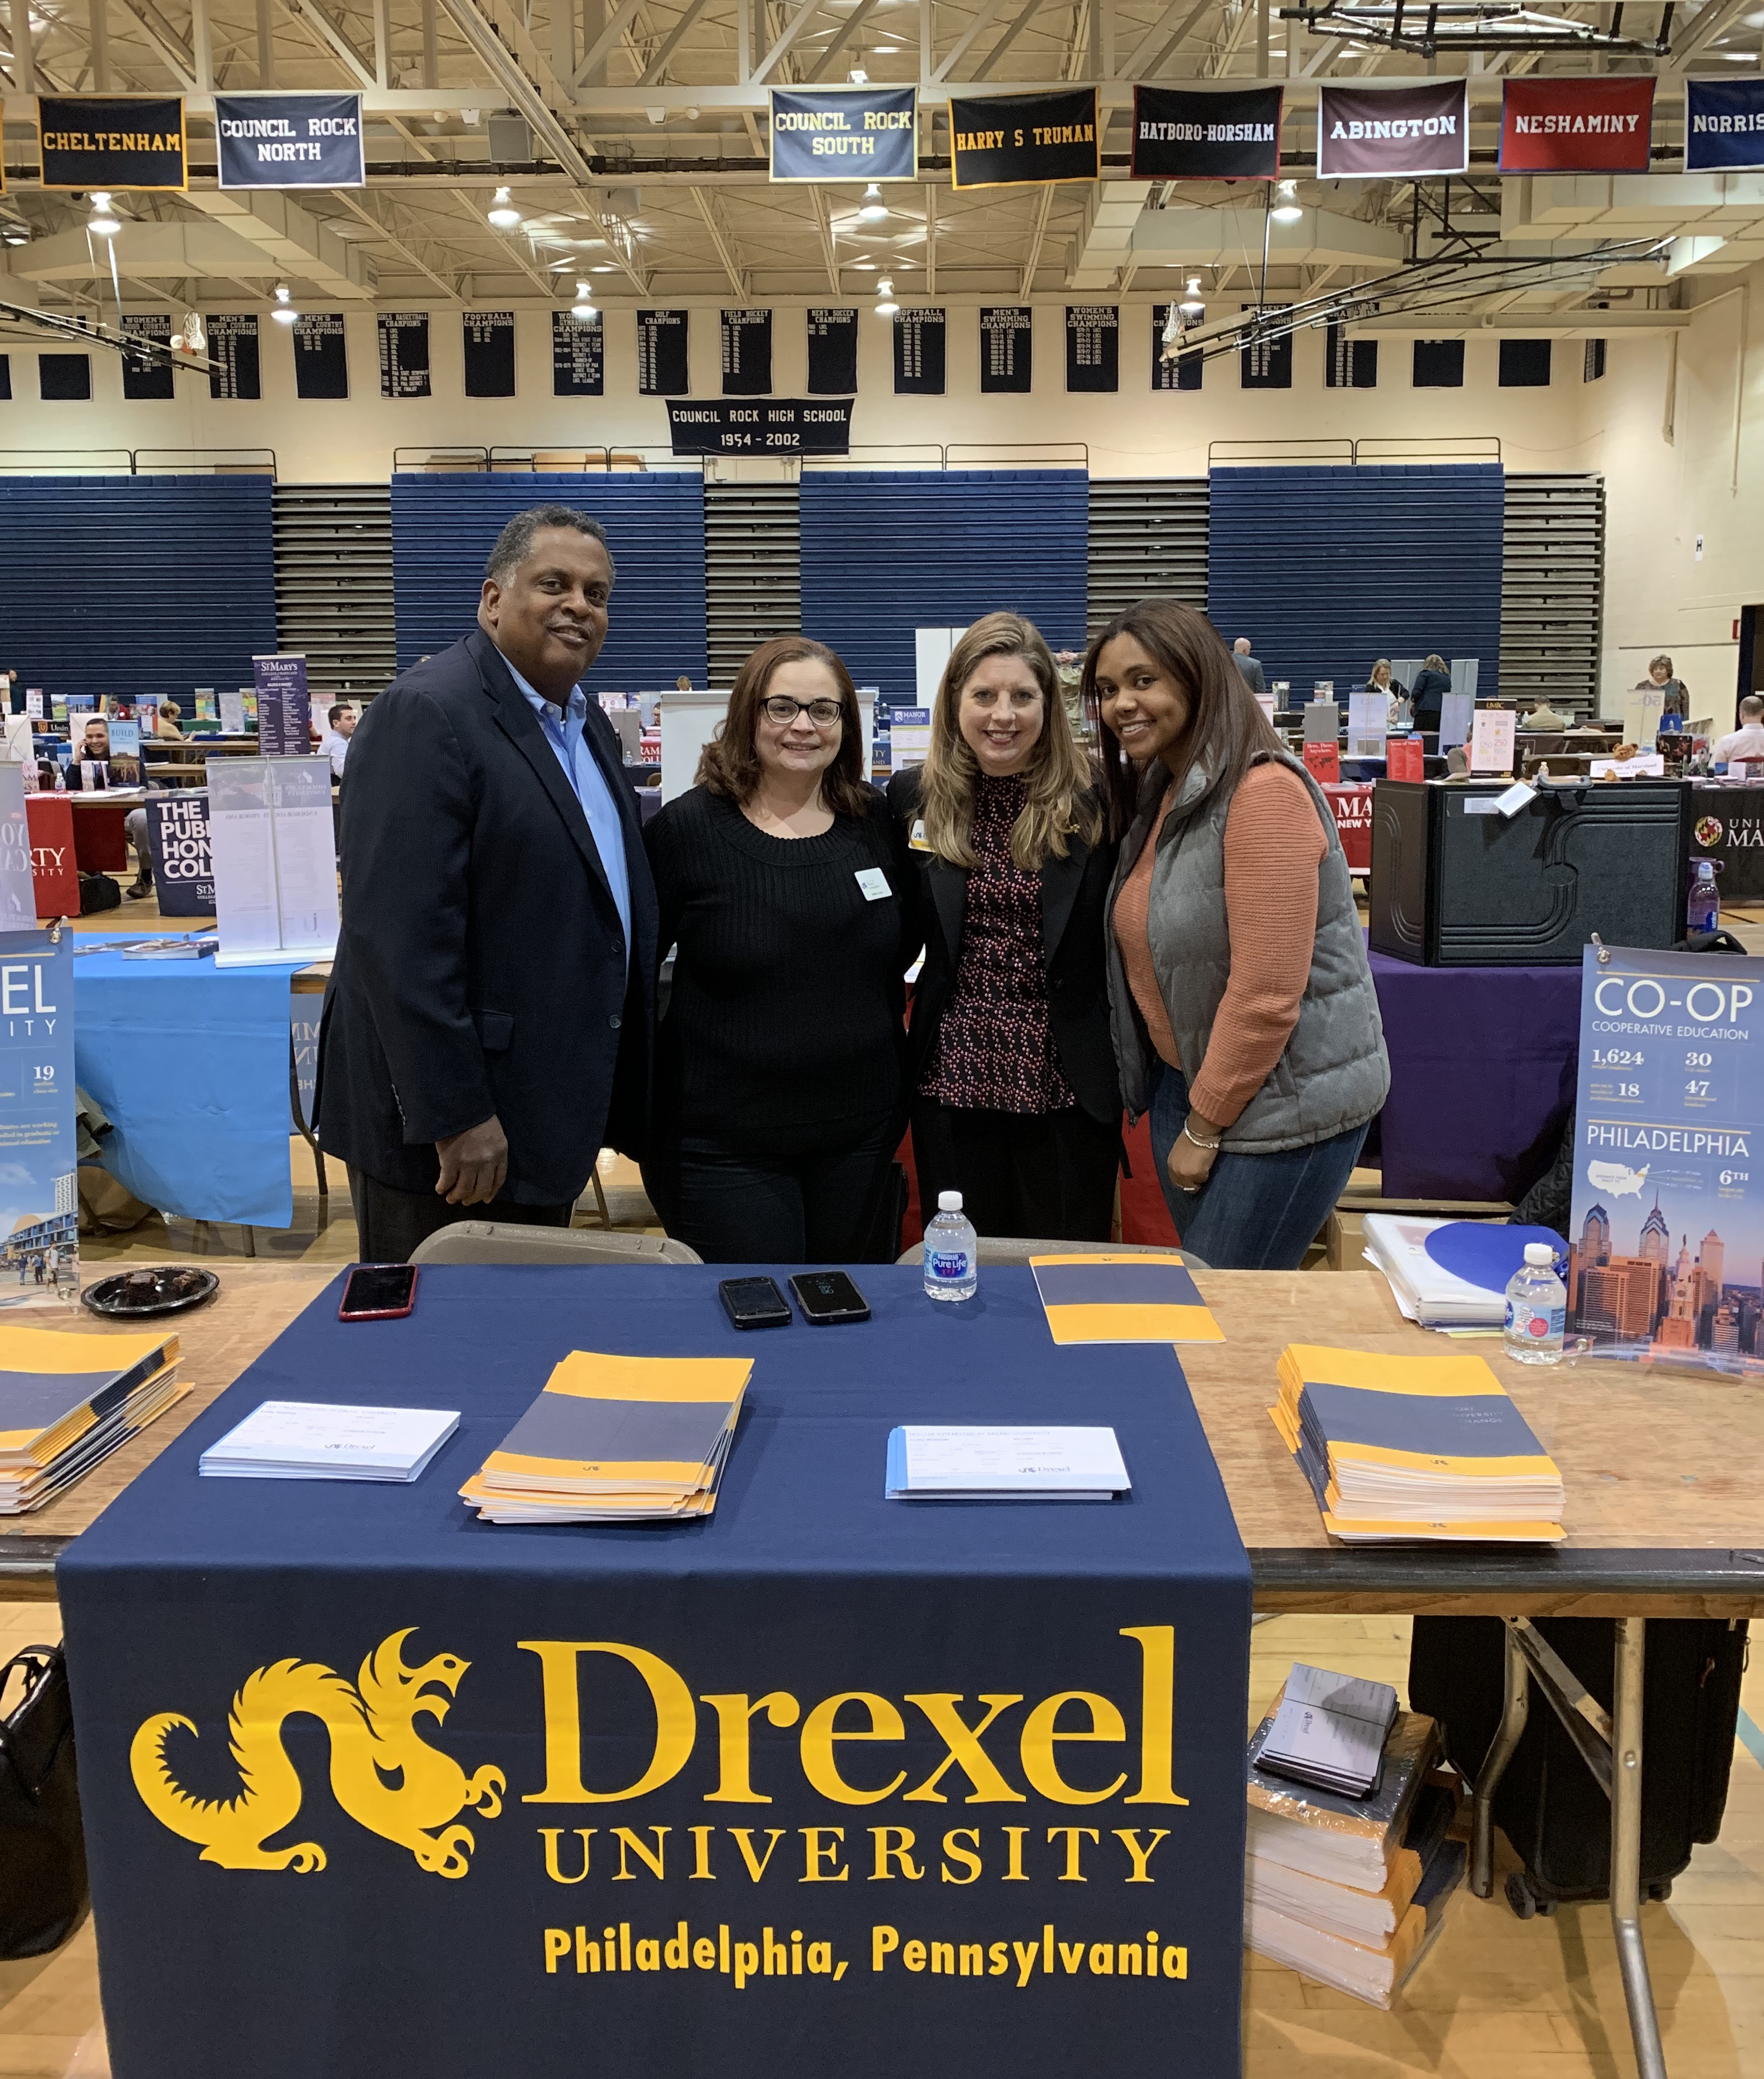 Alumni Ambassadors Carvon Johnson, BS ’85, MS ’88; Izabelle Gómez, BS ’04; Catherine Campbell-Perna, BS ’95, MS ’11; and Janai Johnson, BS ’18 talk to perspective students and their parents at a packed college fair at Council Rock North High School in Bucks County, Pennsylvania. 